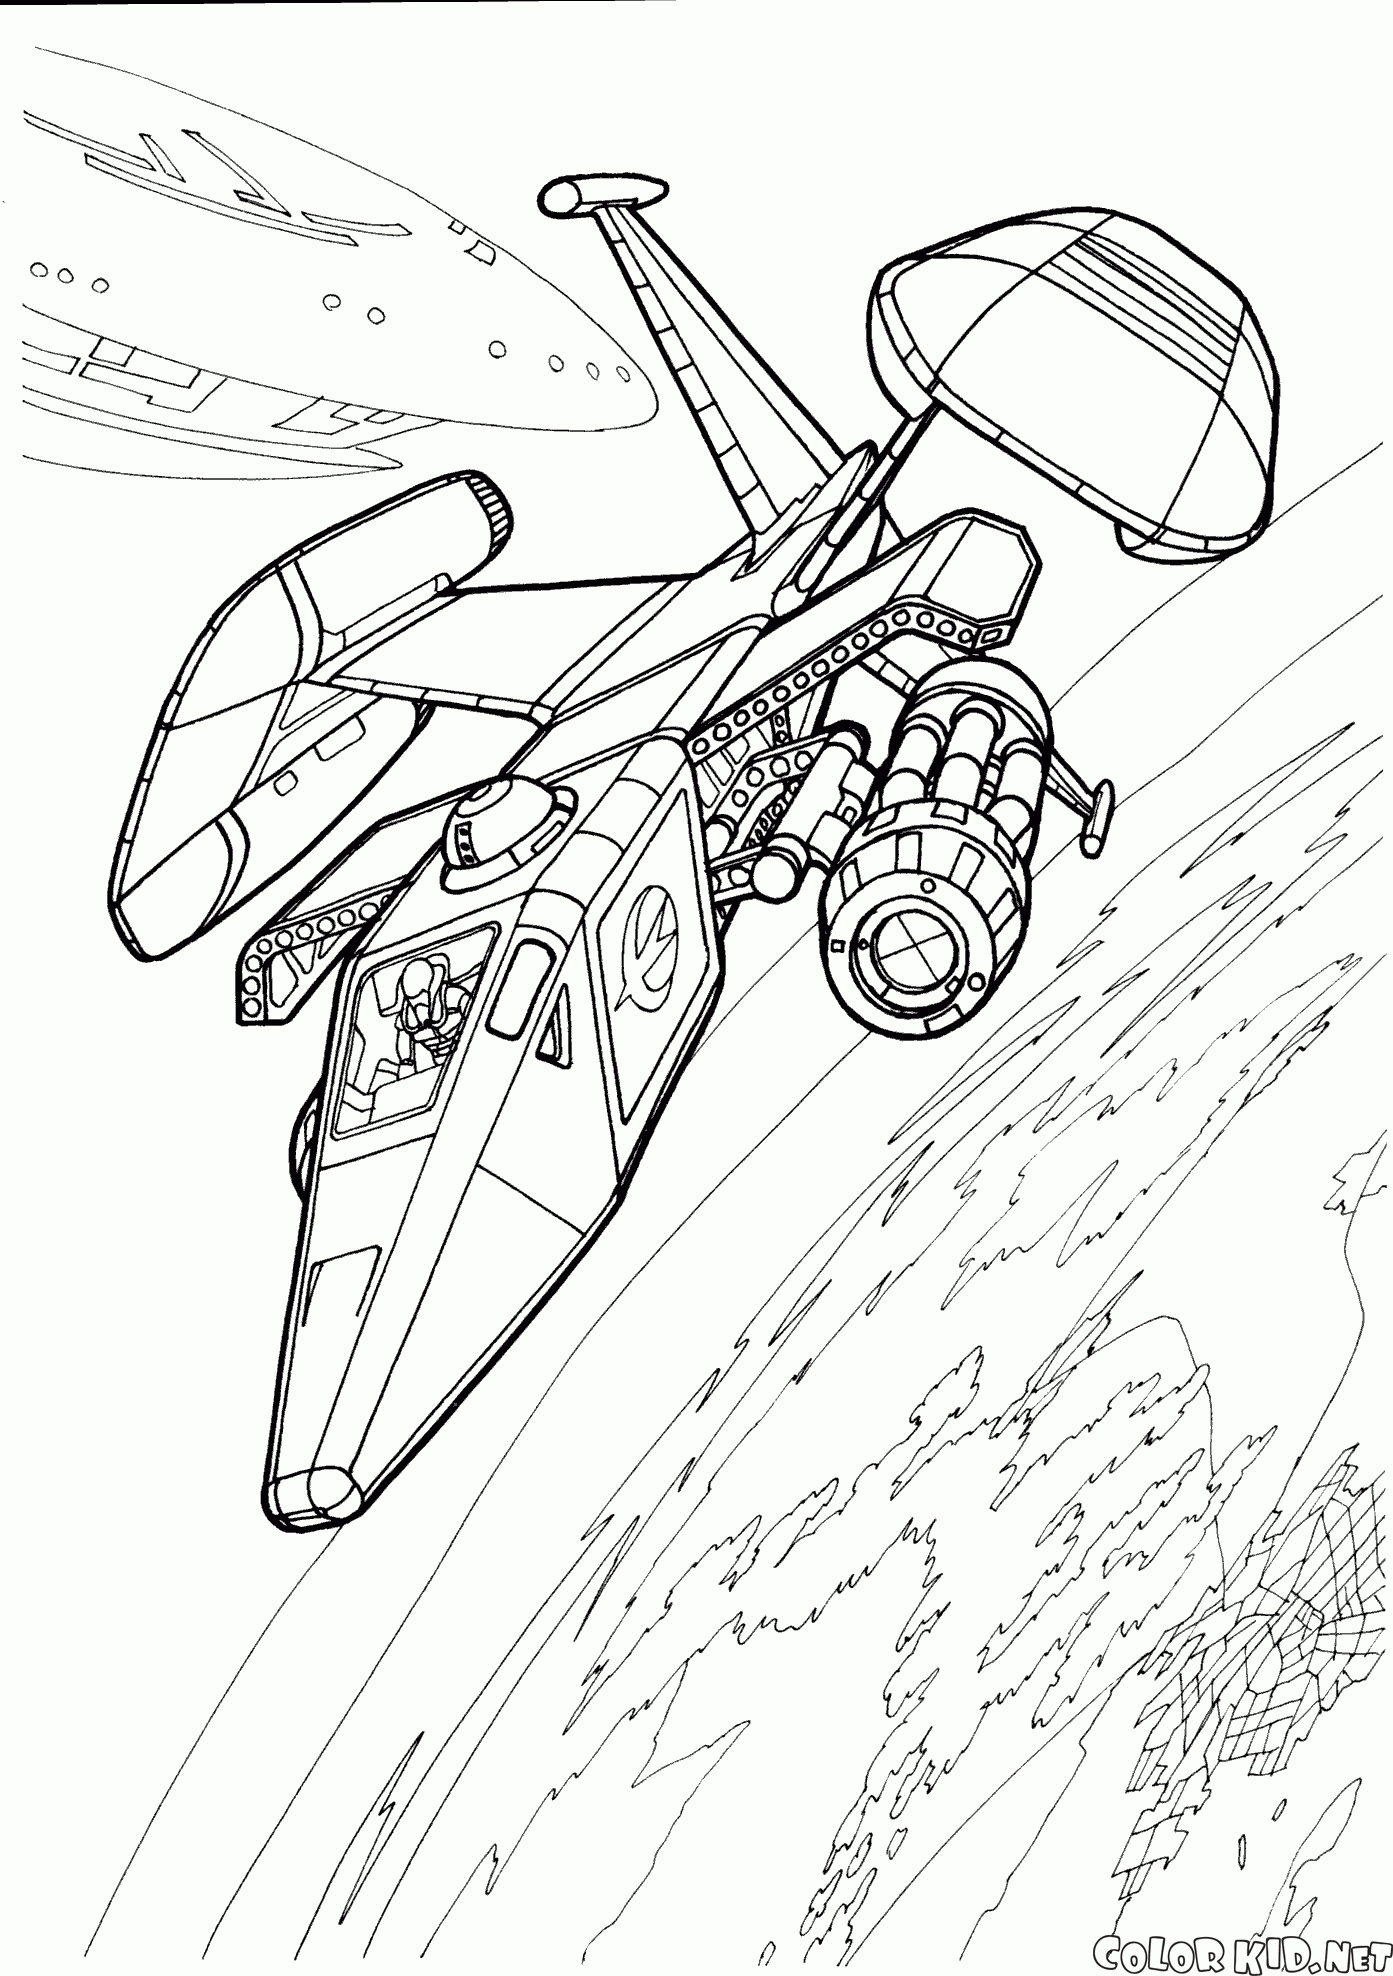 Coloring page - Futuristic vehicles